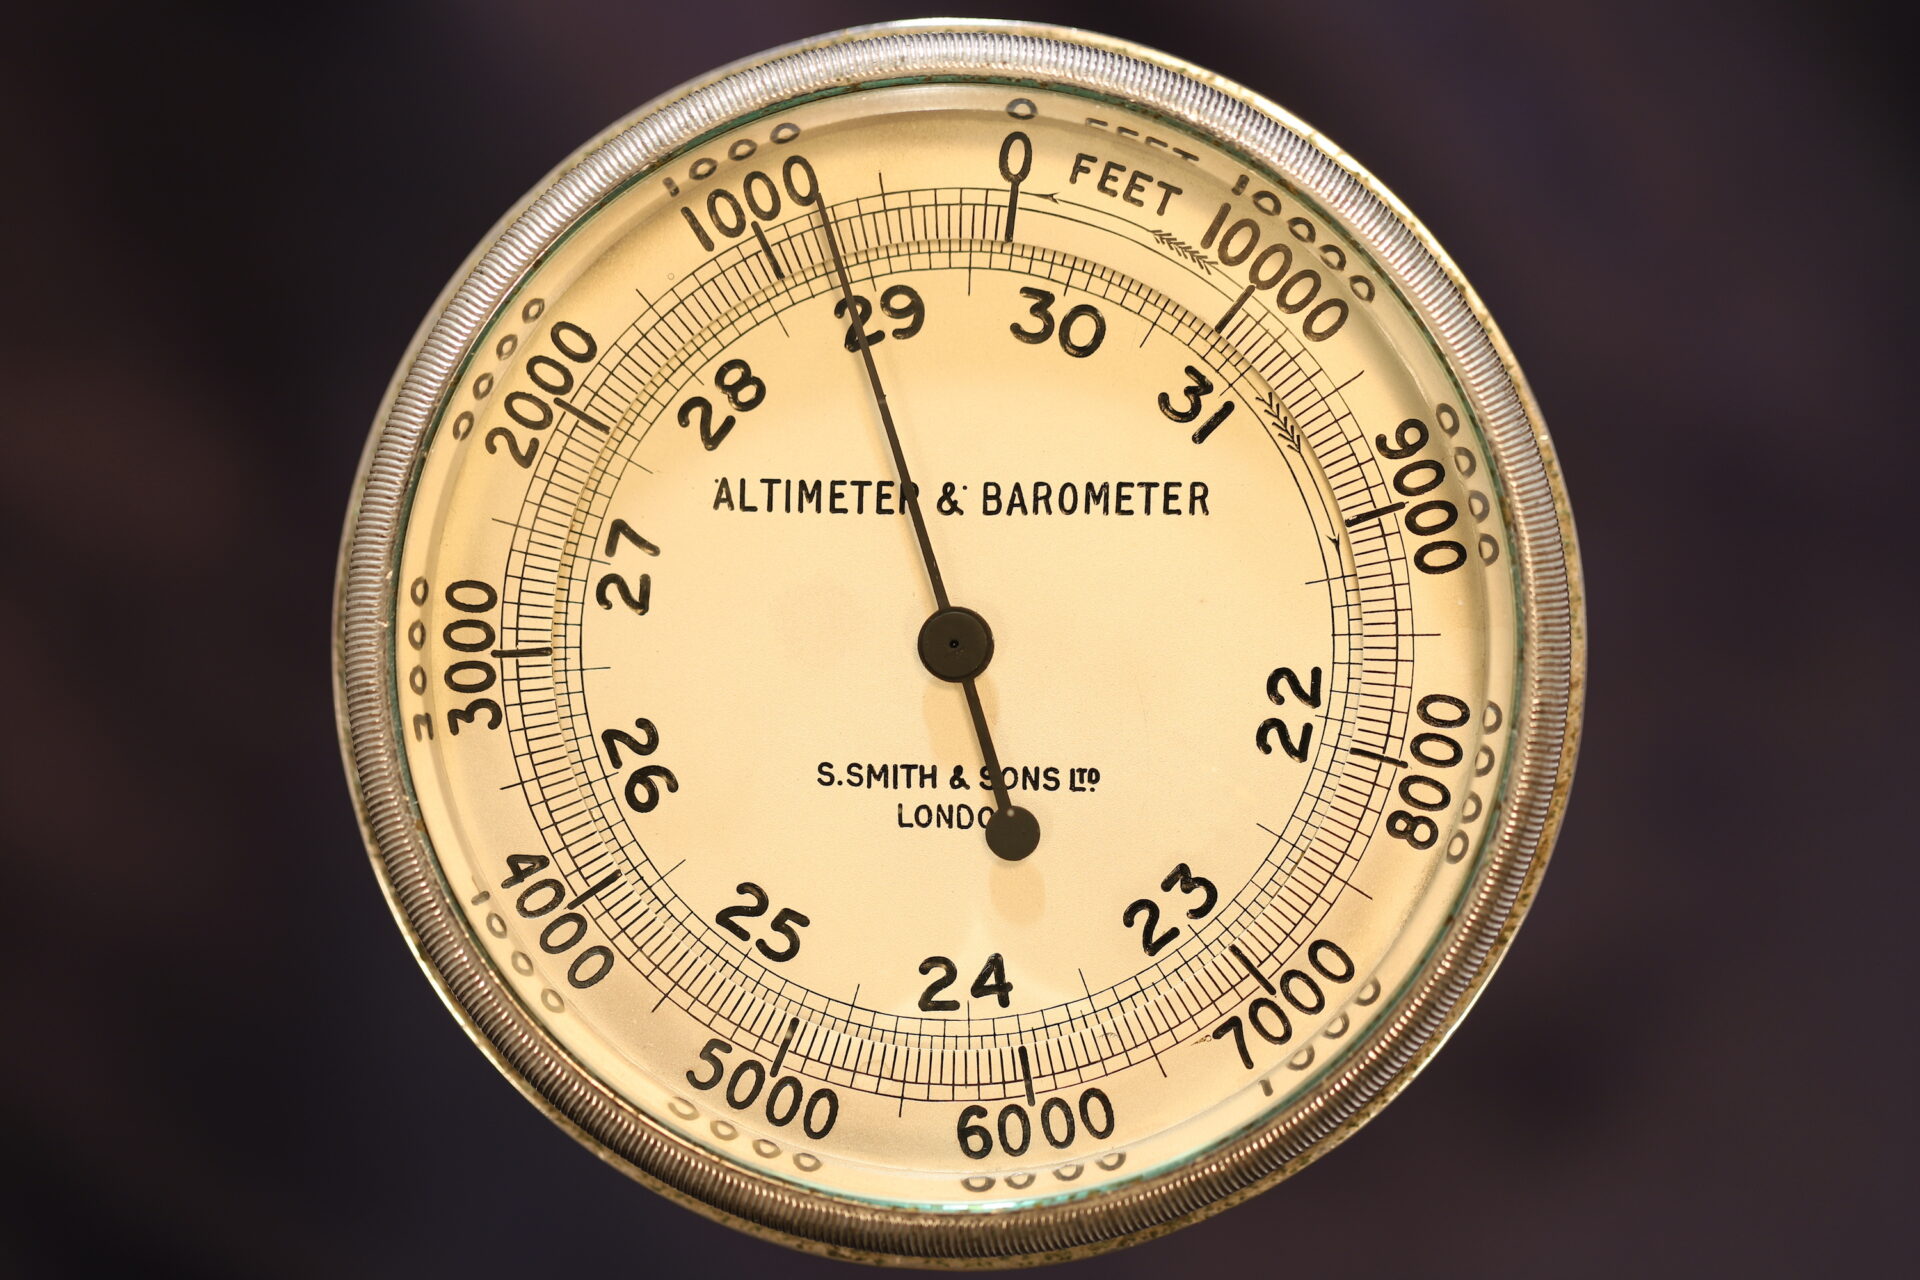 Image of dial of Smith & Sons Altimeter & Barometer c1920